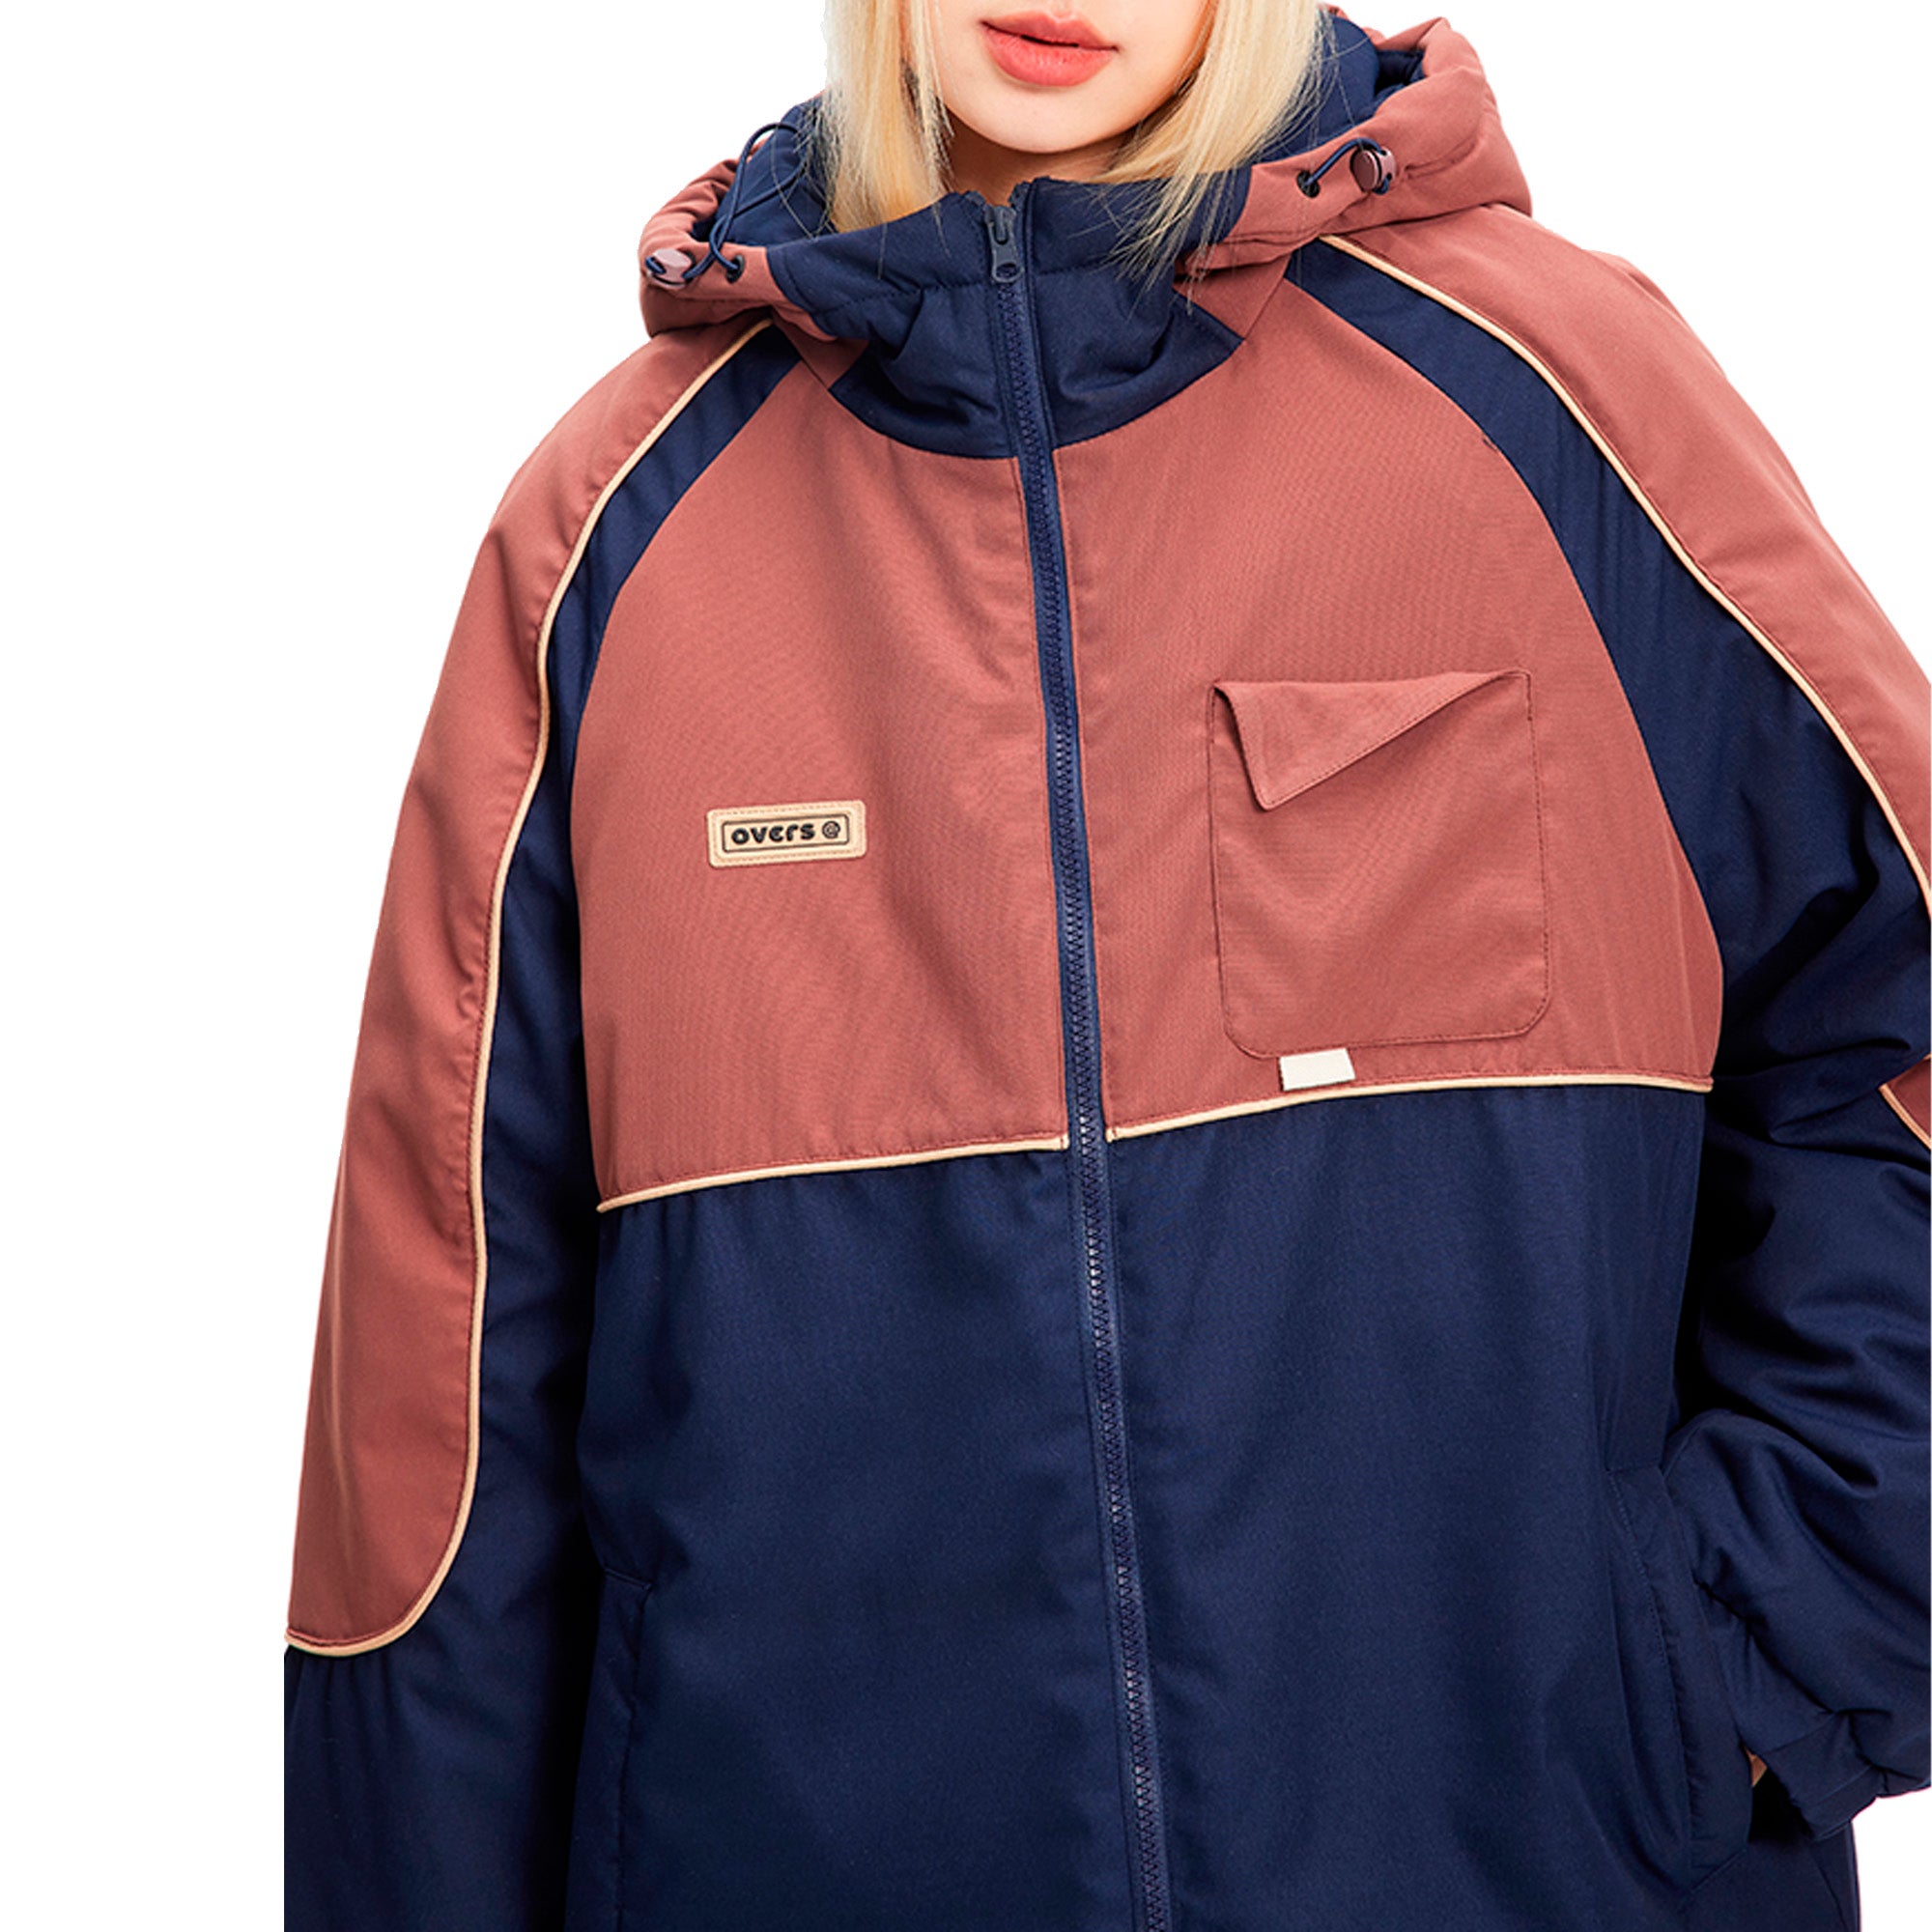 Winter new casual jacket